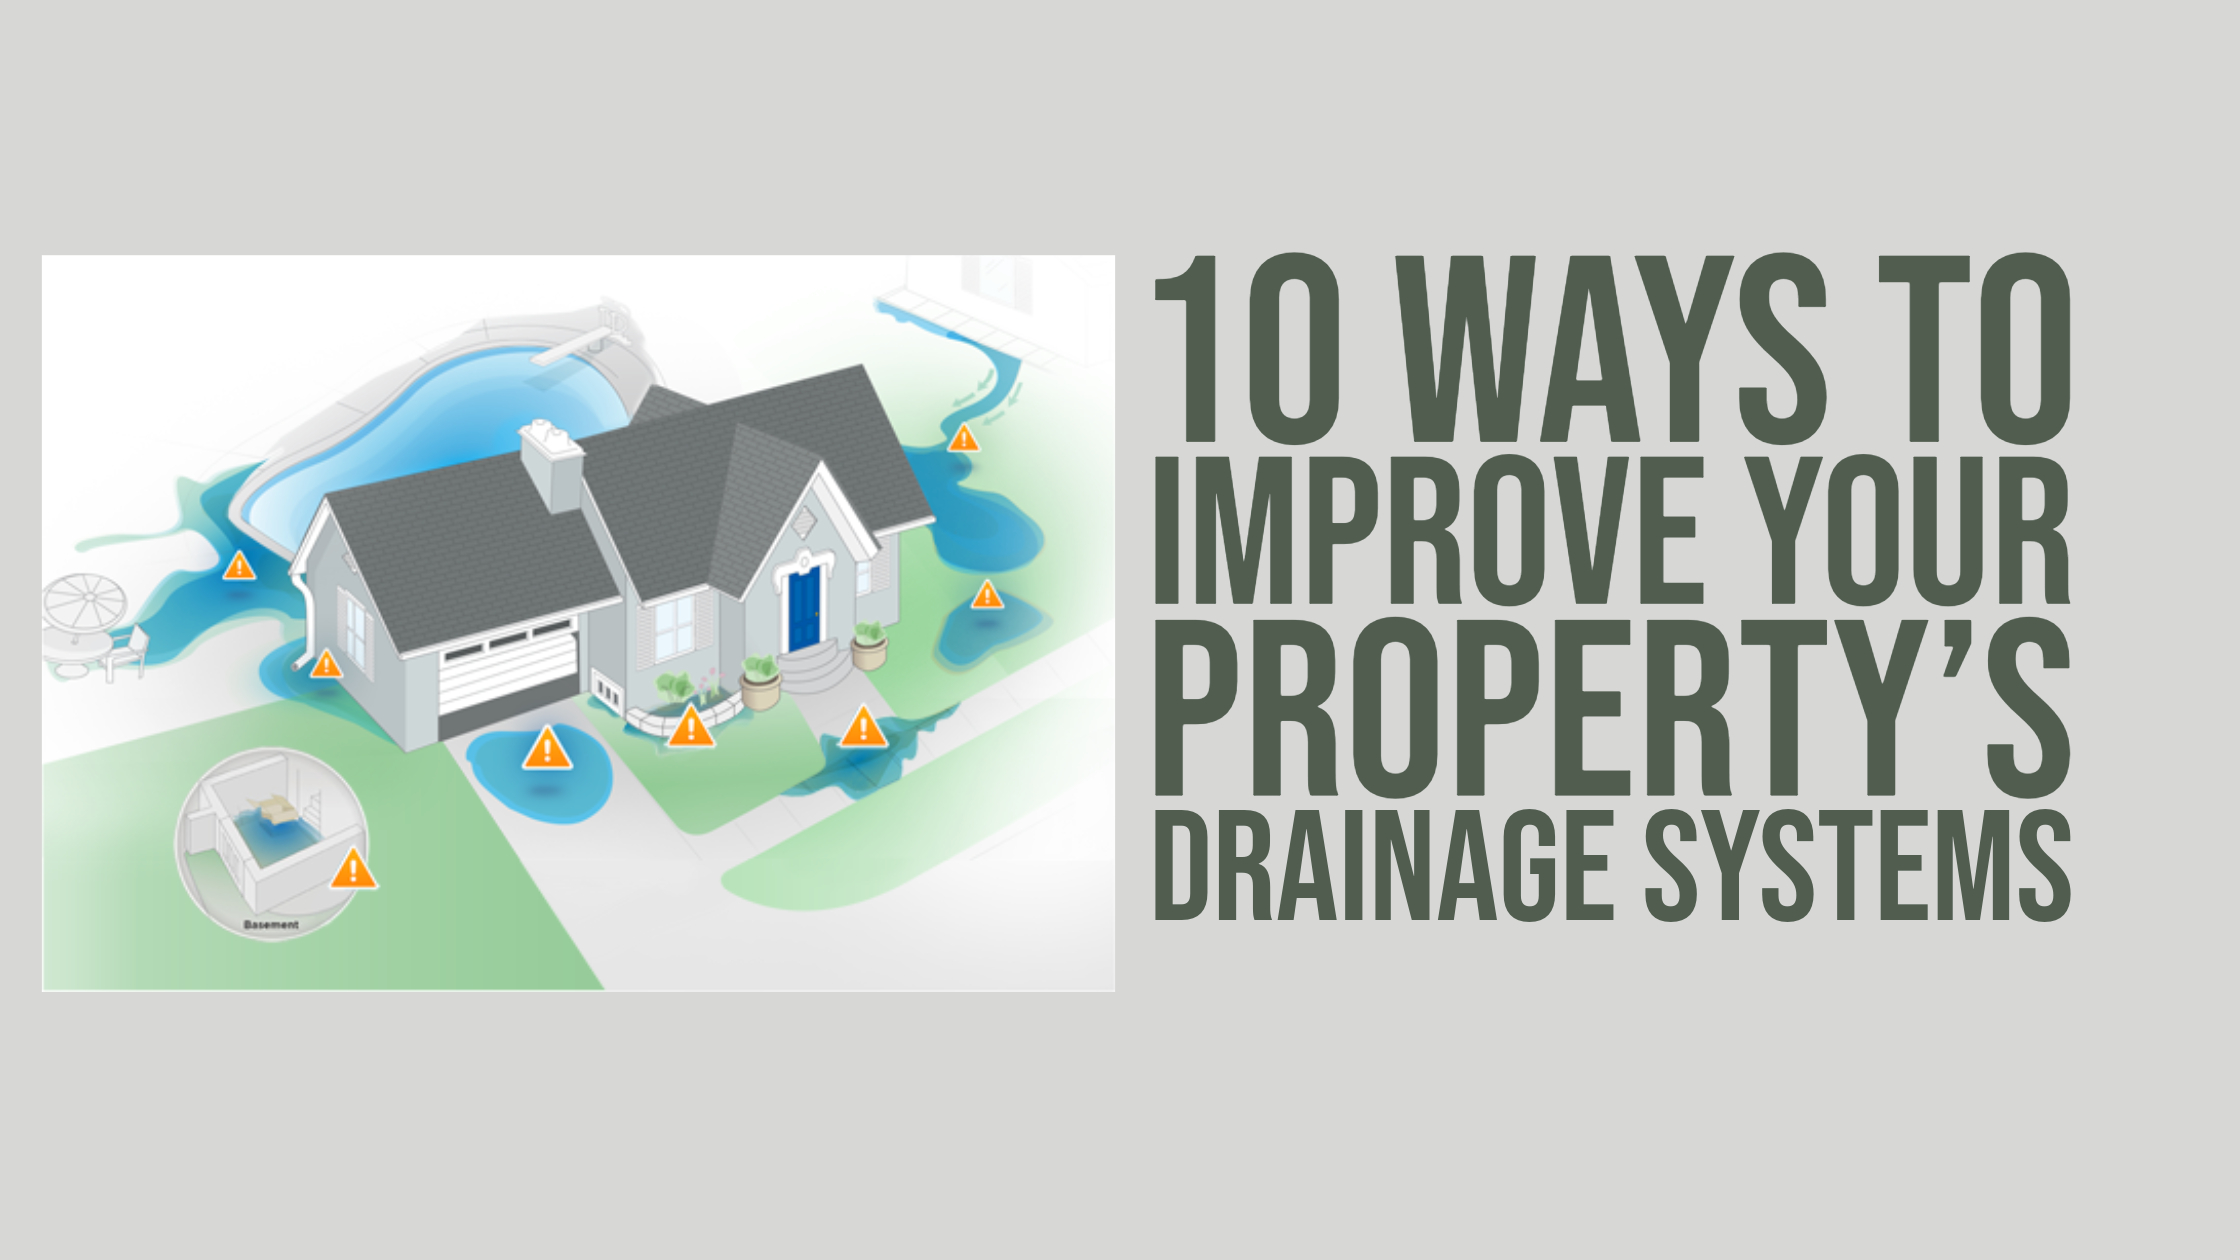 10 Ways To Improve Your Property's Drainage Systems